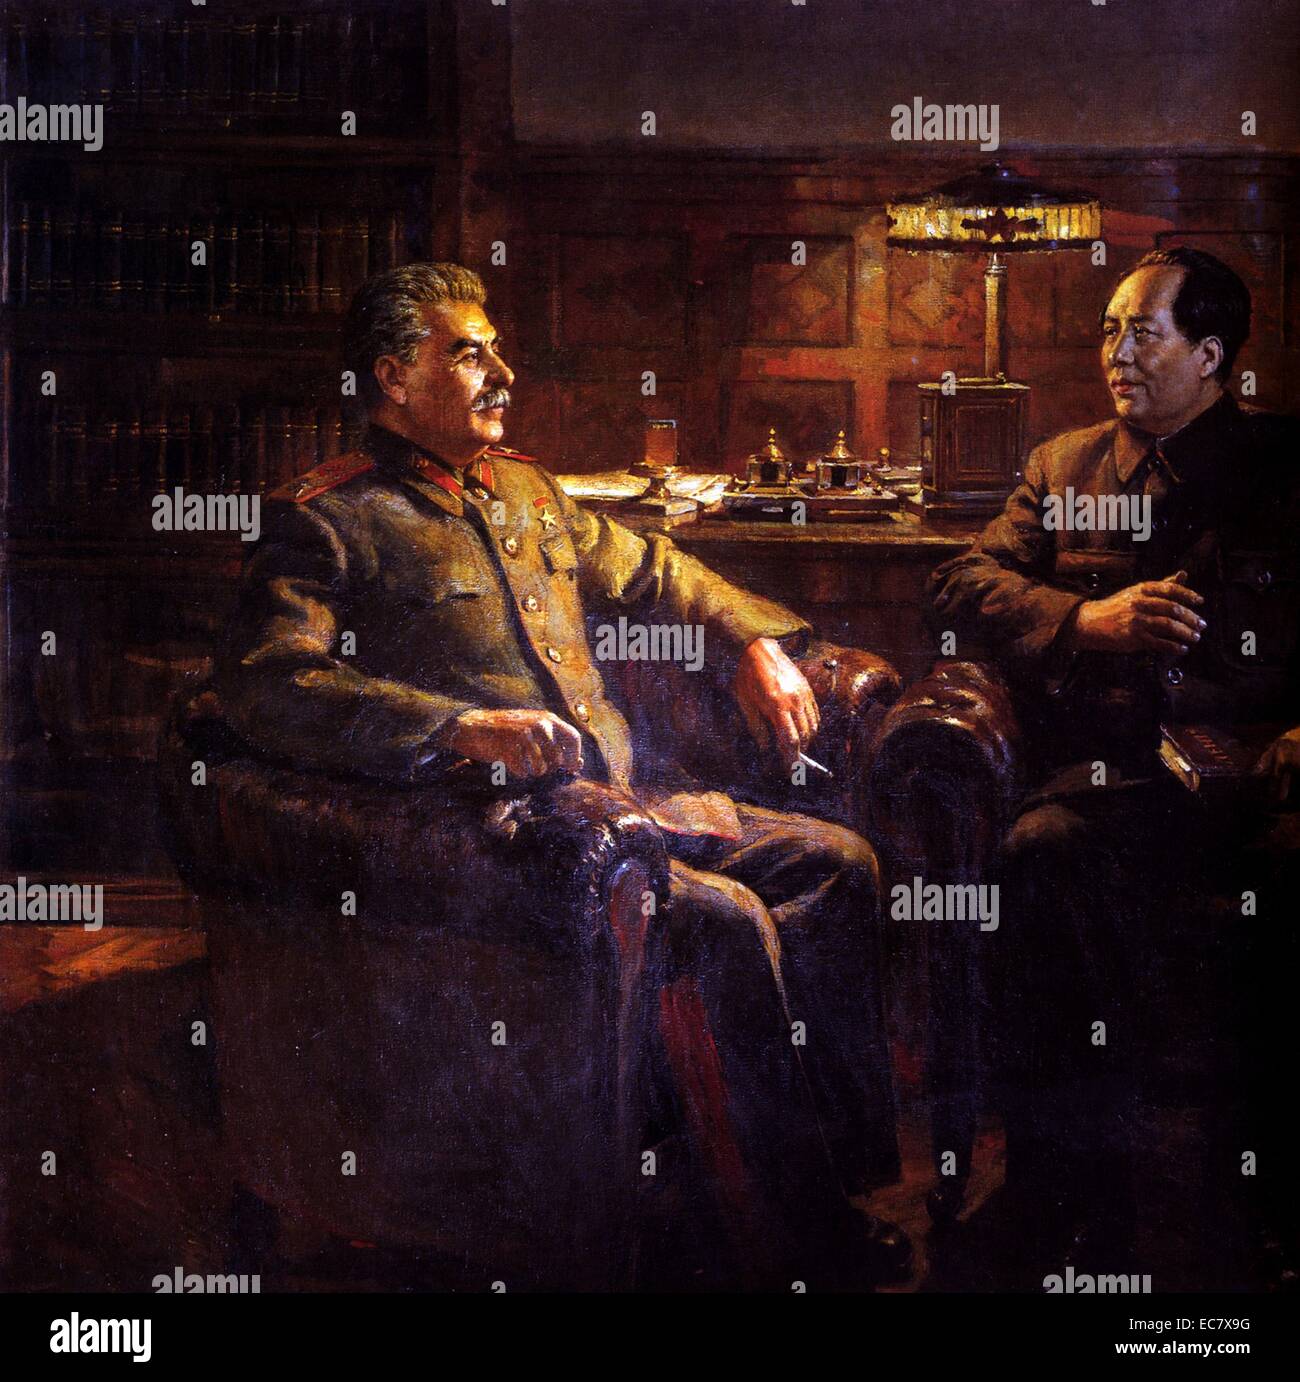 Dmitri Nalbadanian Painting called 'The Great Friendship' 1950. Depicts Stalin (Russia) and Mao Zedong (China) meeting Stock Photo